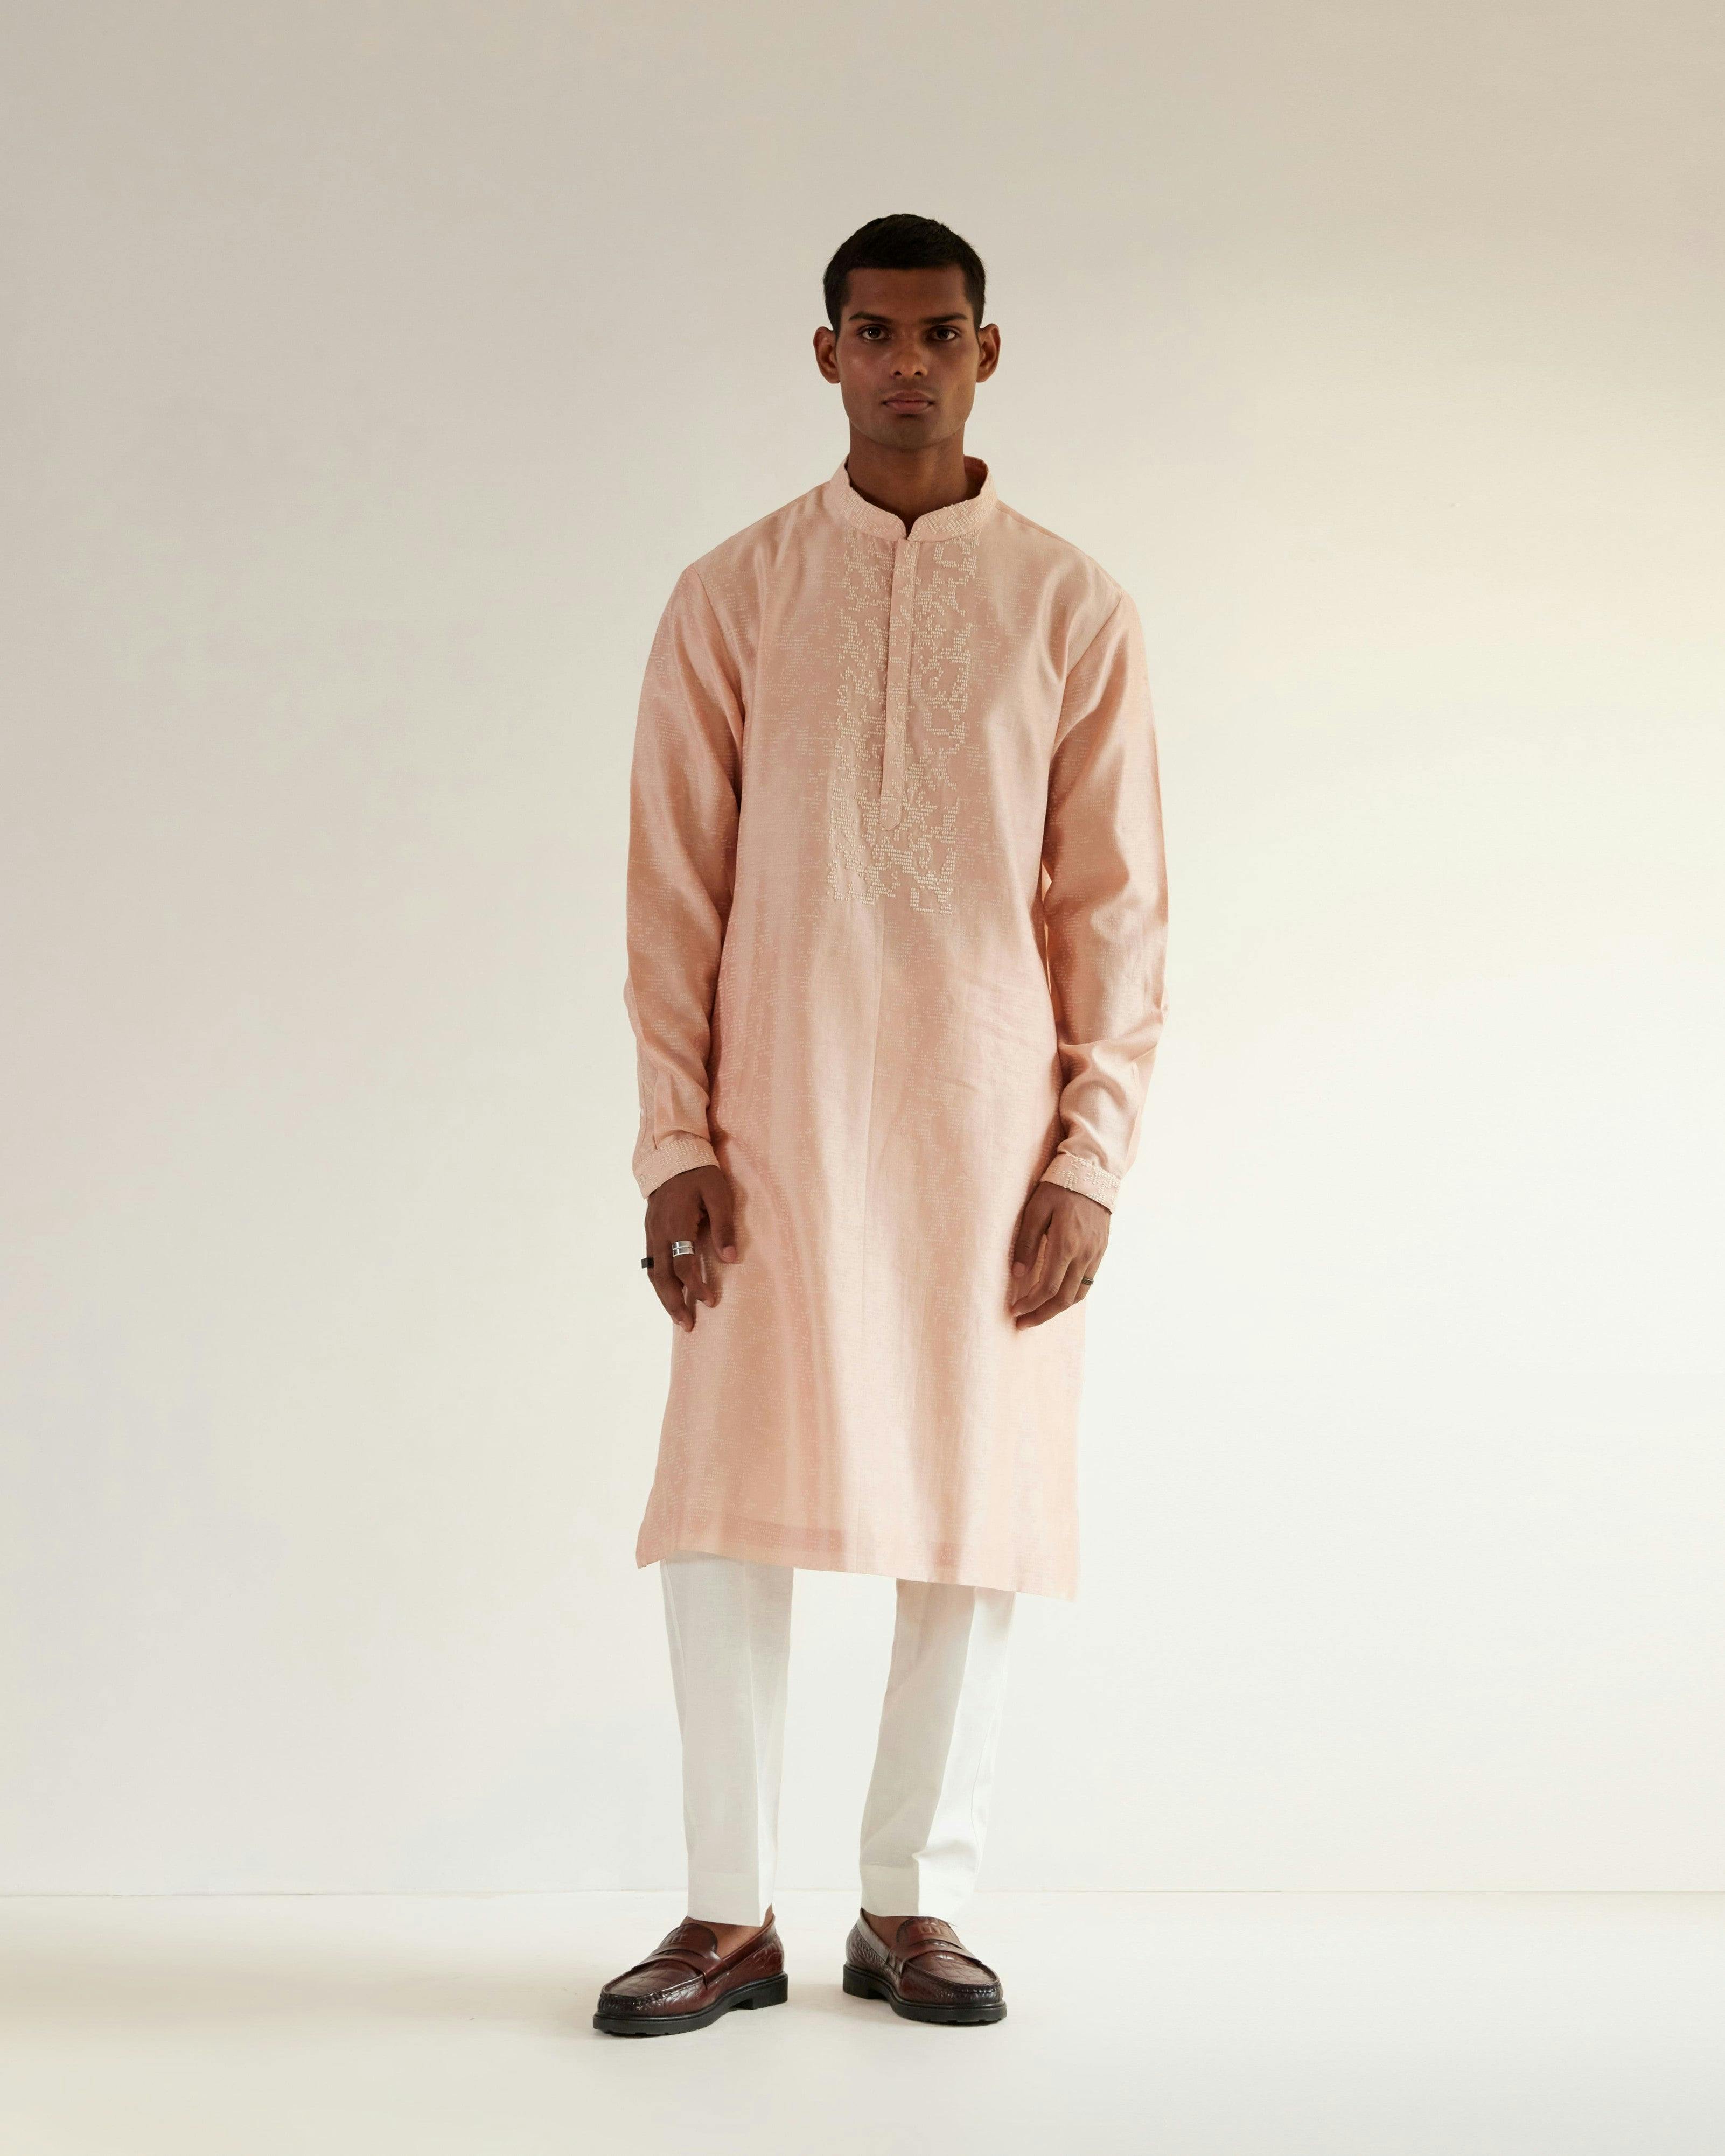 Camo-Block Print Kurta Set With Embroidered Yoke, a product by Country Made